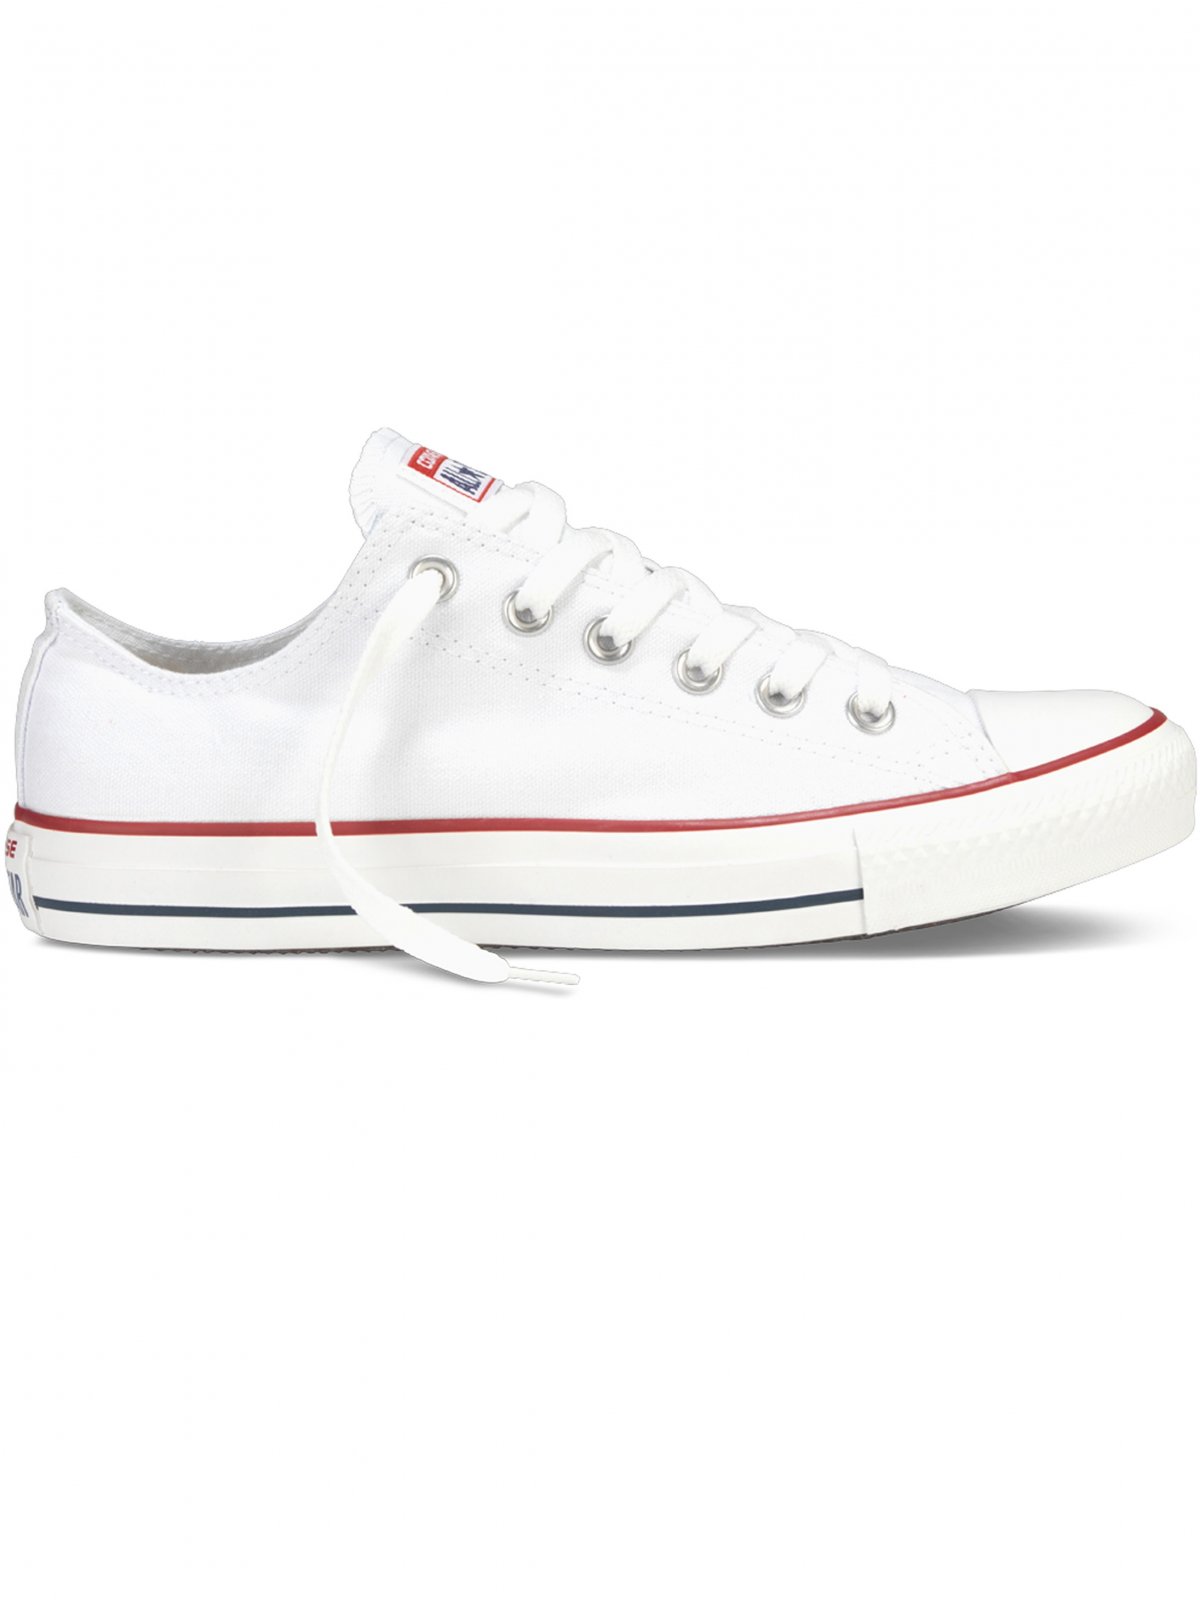 Converse All Star Unisex Chuck Top Sneakers